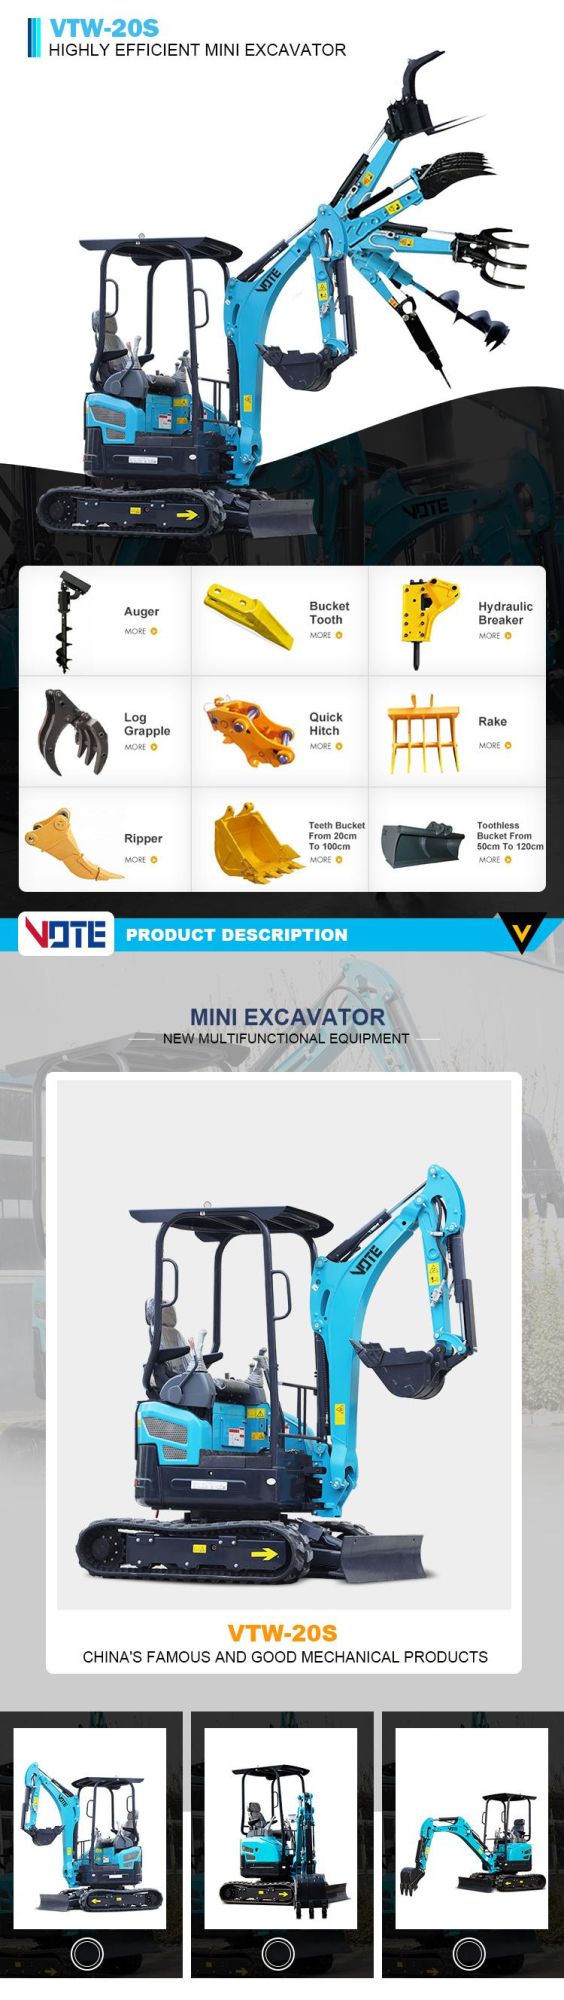 Hot Mini Excavator Small Digger Quick Coupler High Quality Replace Assistives Factory Price for Sale 2.0 Ton Digger Sell